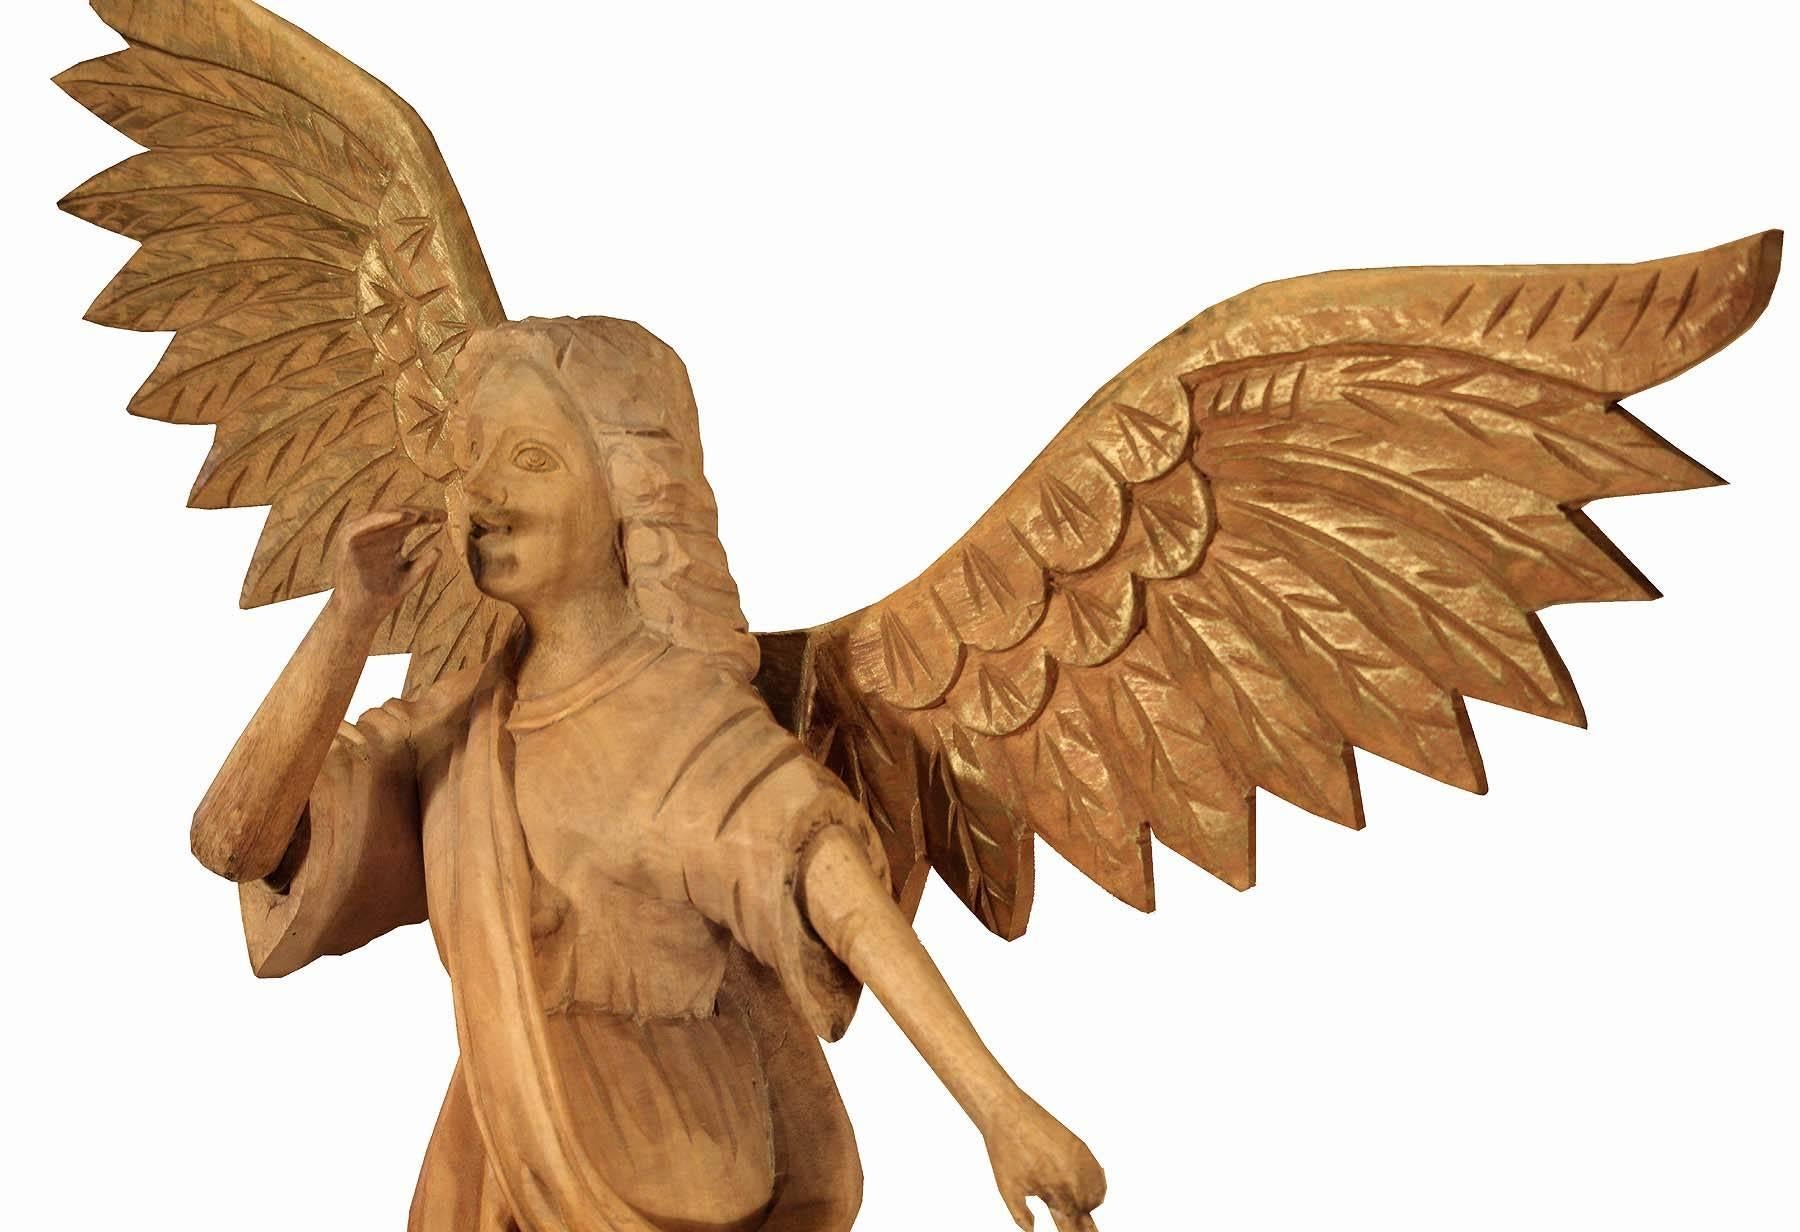 This is an large architectural element salvaged from a North American Church. Hand-carved with amazing details. The wings are detachable for shipping and easily slide onto her back. The wood is solid maple there are remnants of gold guild on the